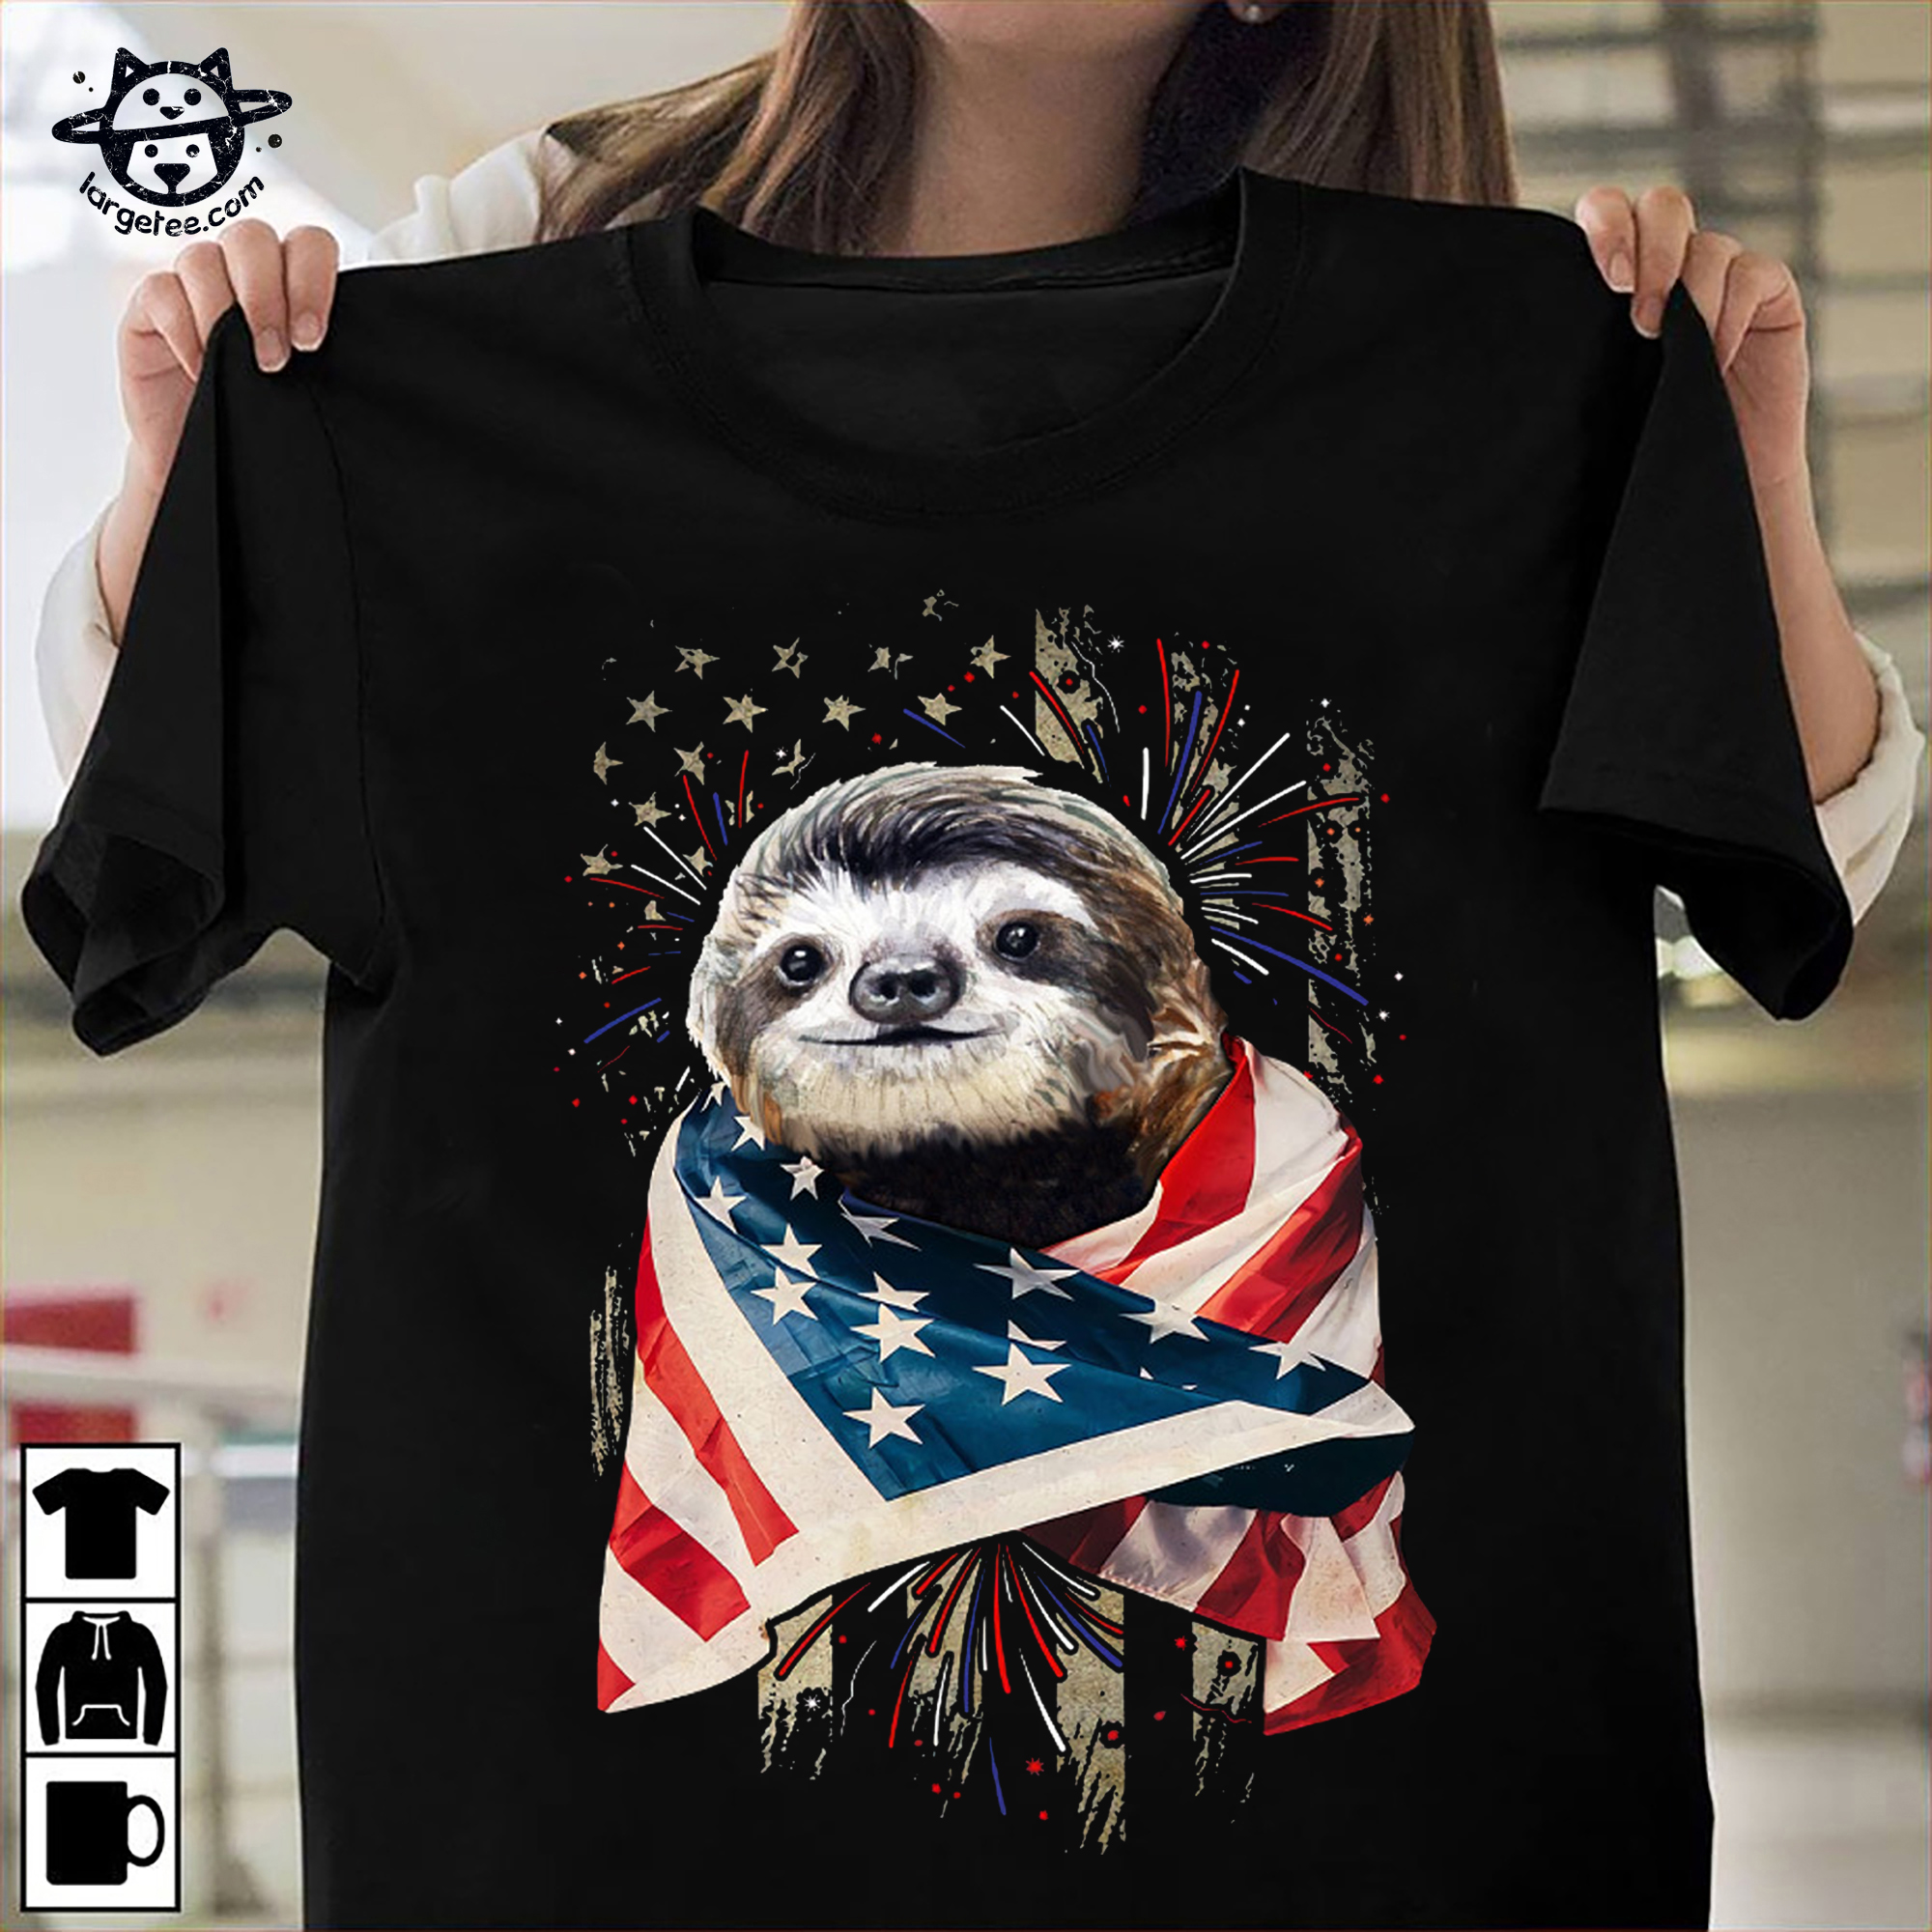 Sloth and America flag - The independence day, sloth lover